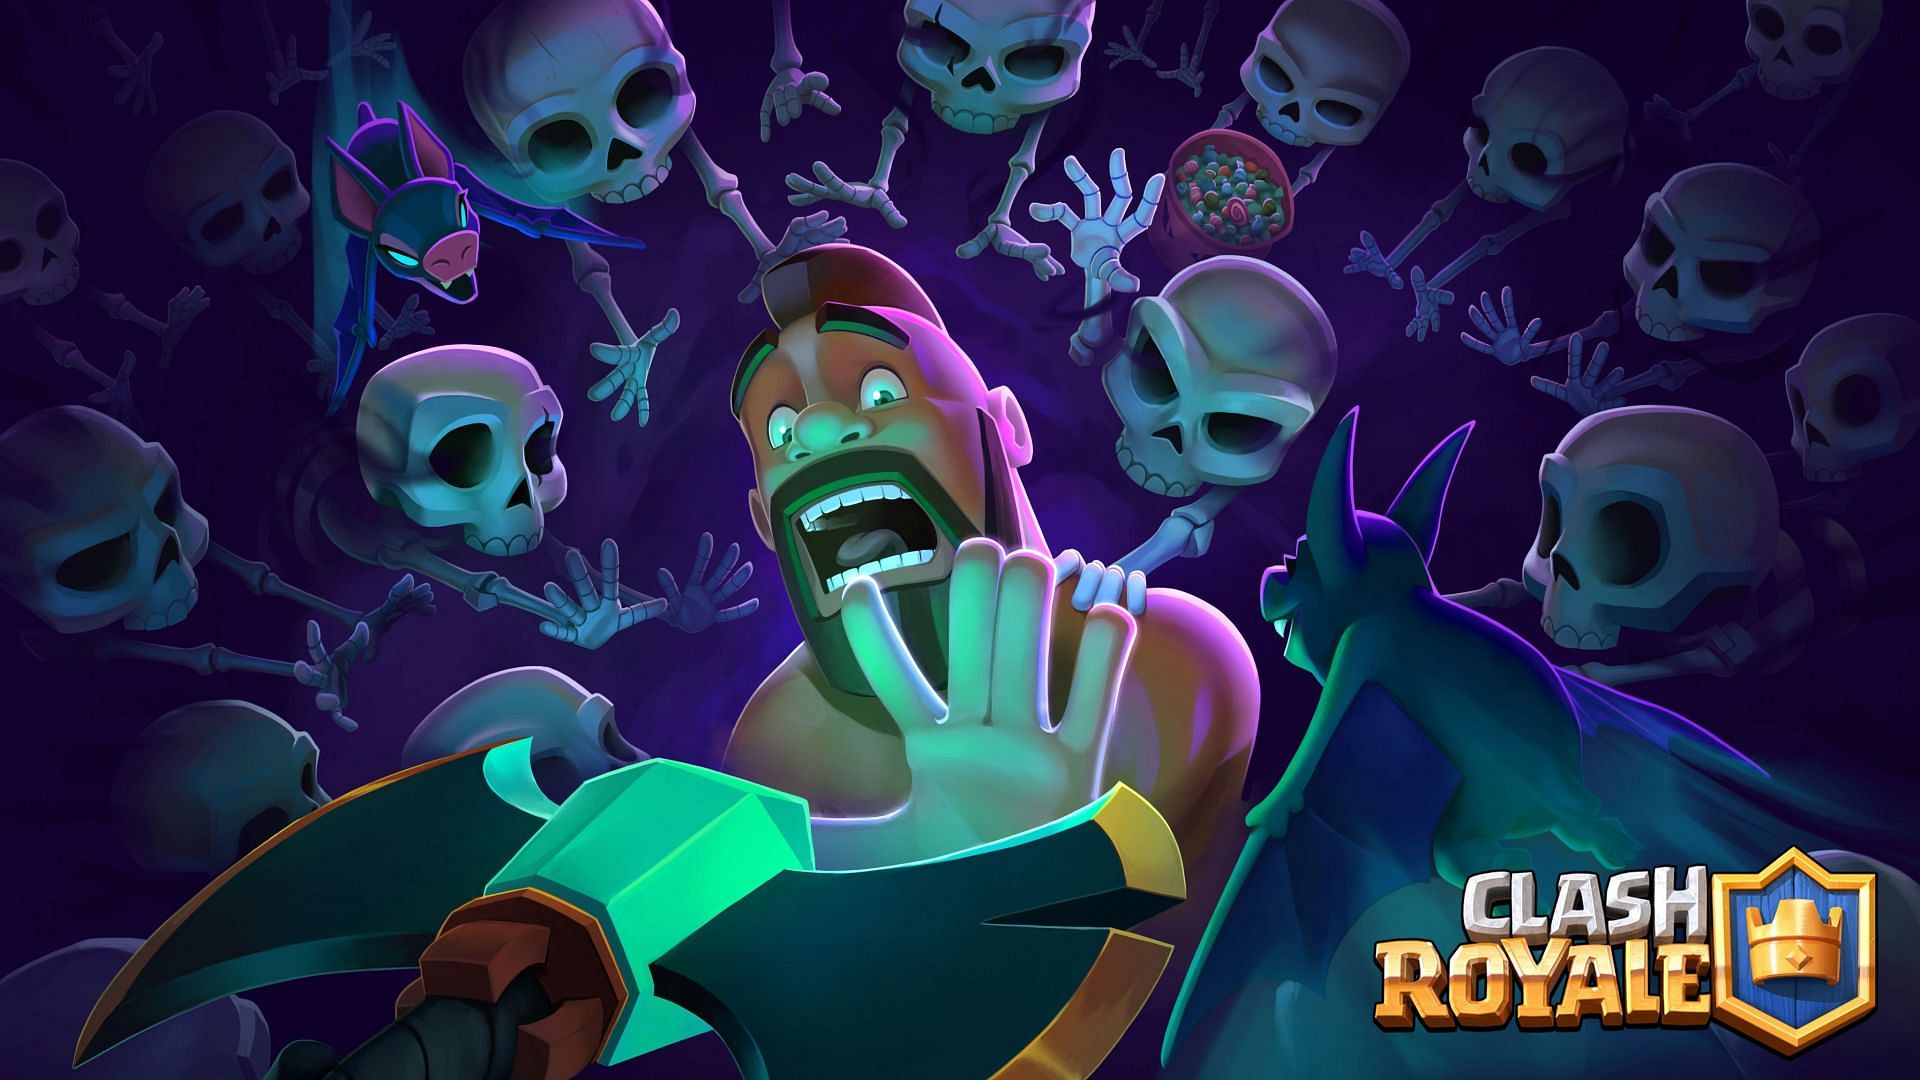 Hog Rider in the poster (Image via Supercell)